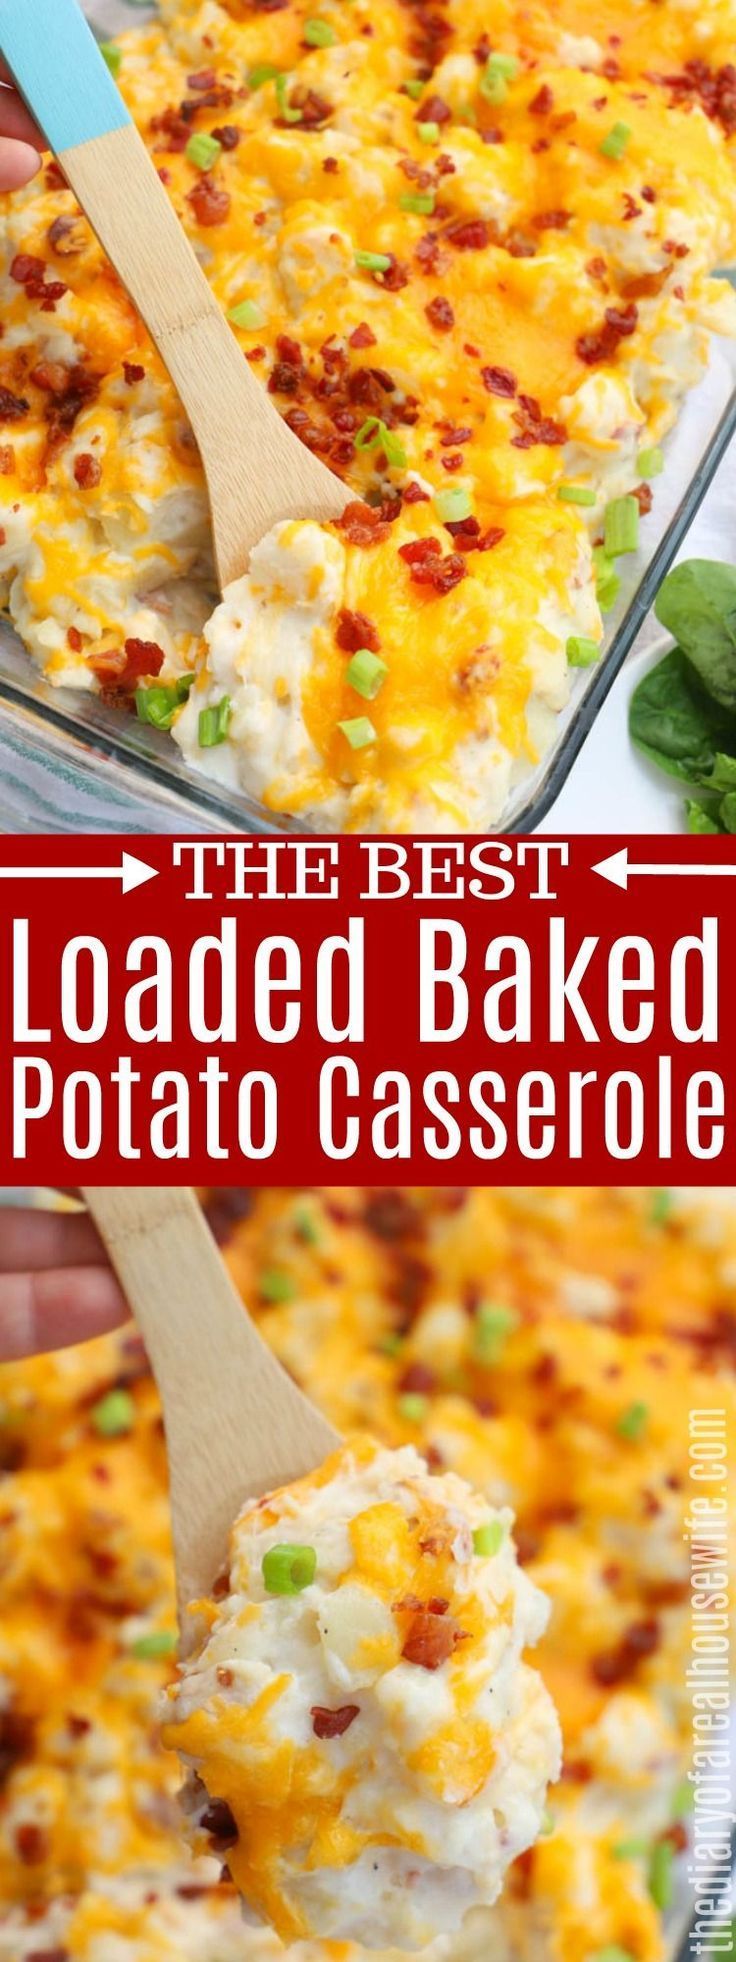 Loaded Baked Potato Casserole - The Diary of a Real Housewife - Loaded Baked Potato Casserole - The Diary of a Real Housewife -   17 thanksgiving sides ideas